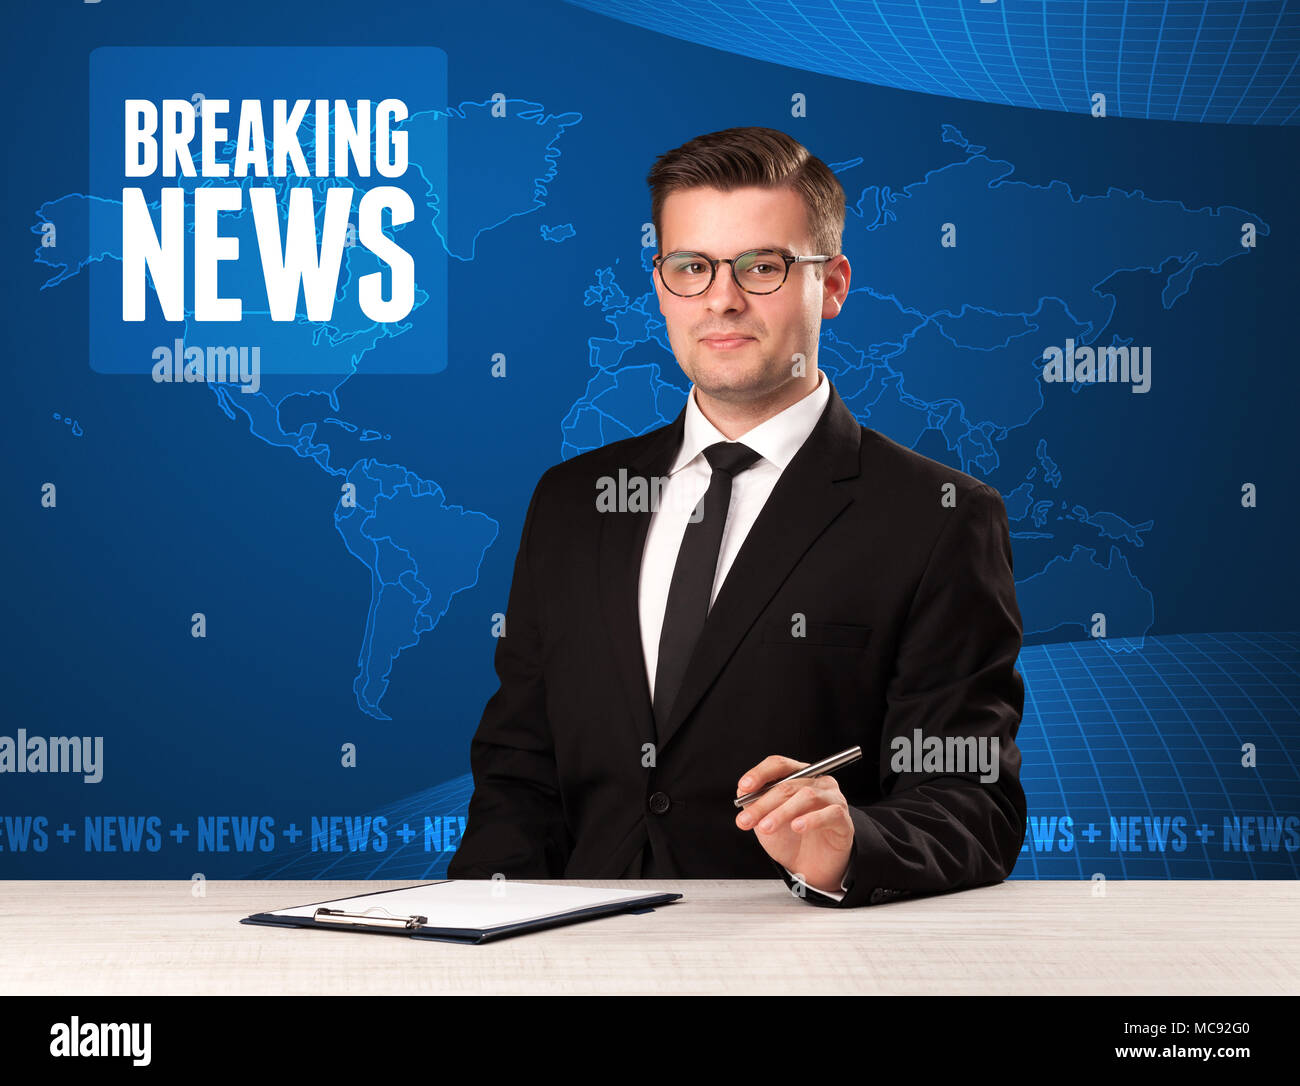 Television presenter in front telling breaking news with blue modern  background concept Stock Photo - Alamy